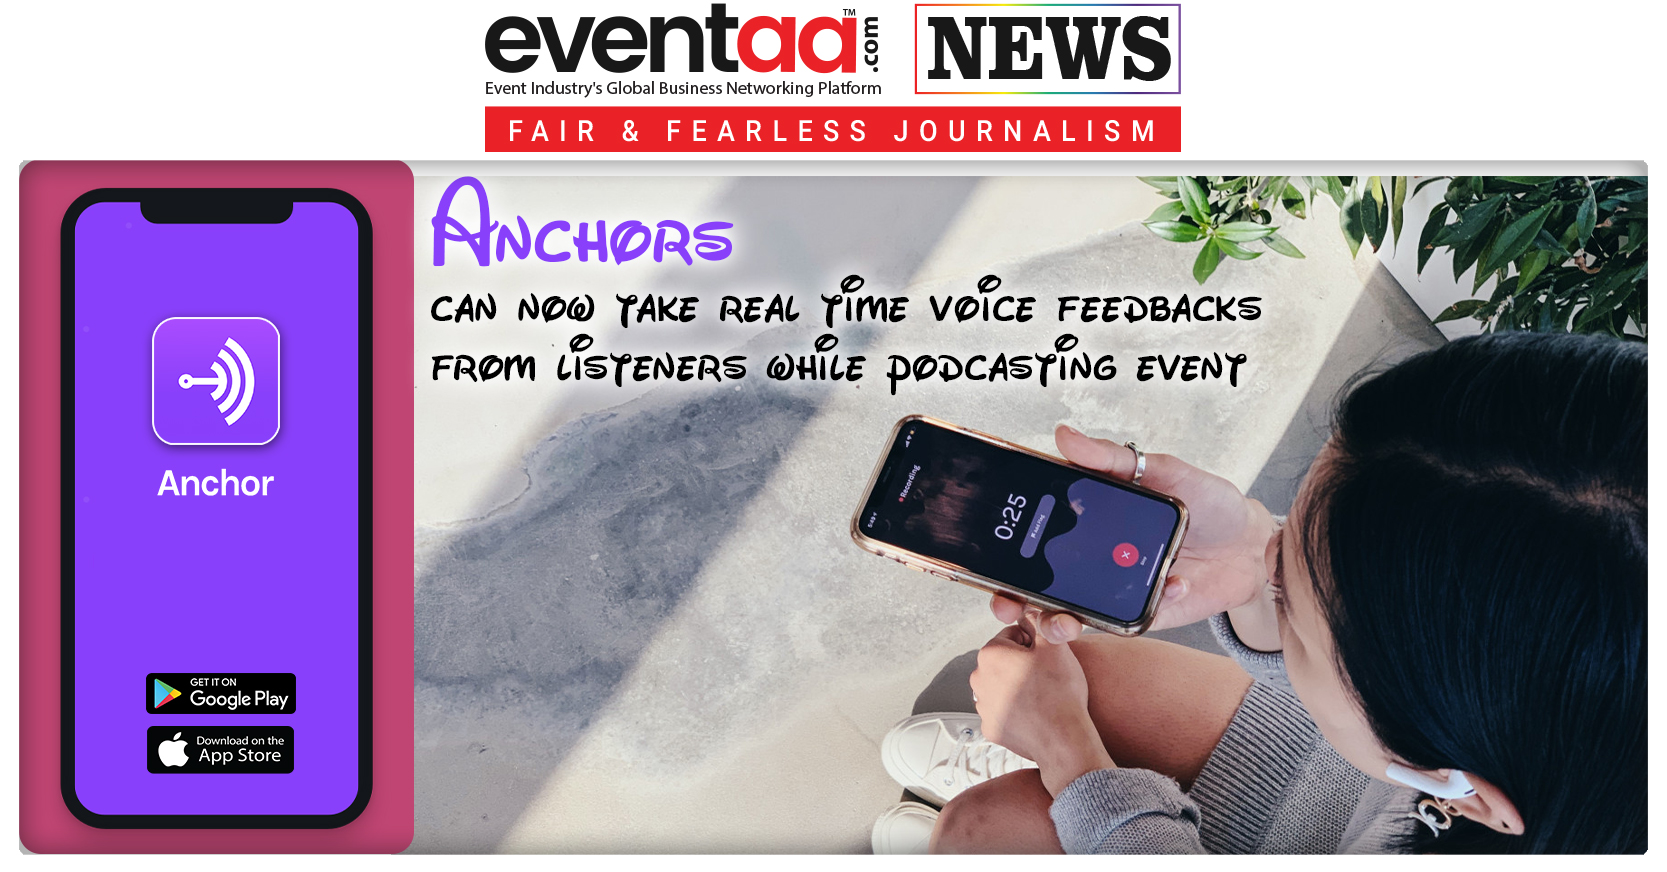 Anchors can now take real time voice feedbacks from listeners while podcasting event